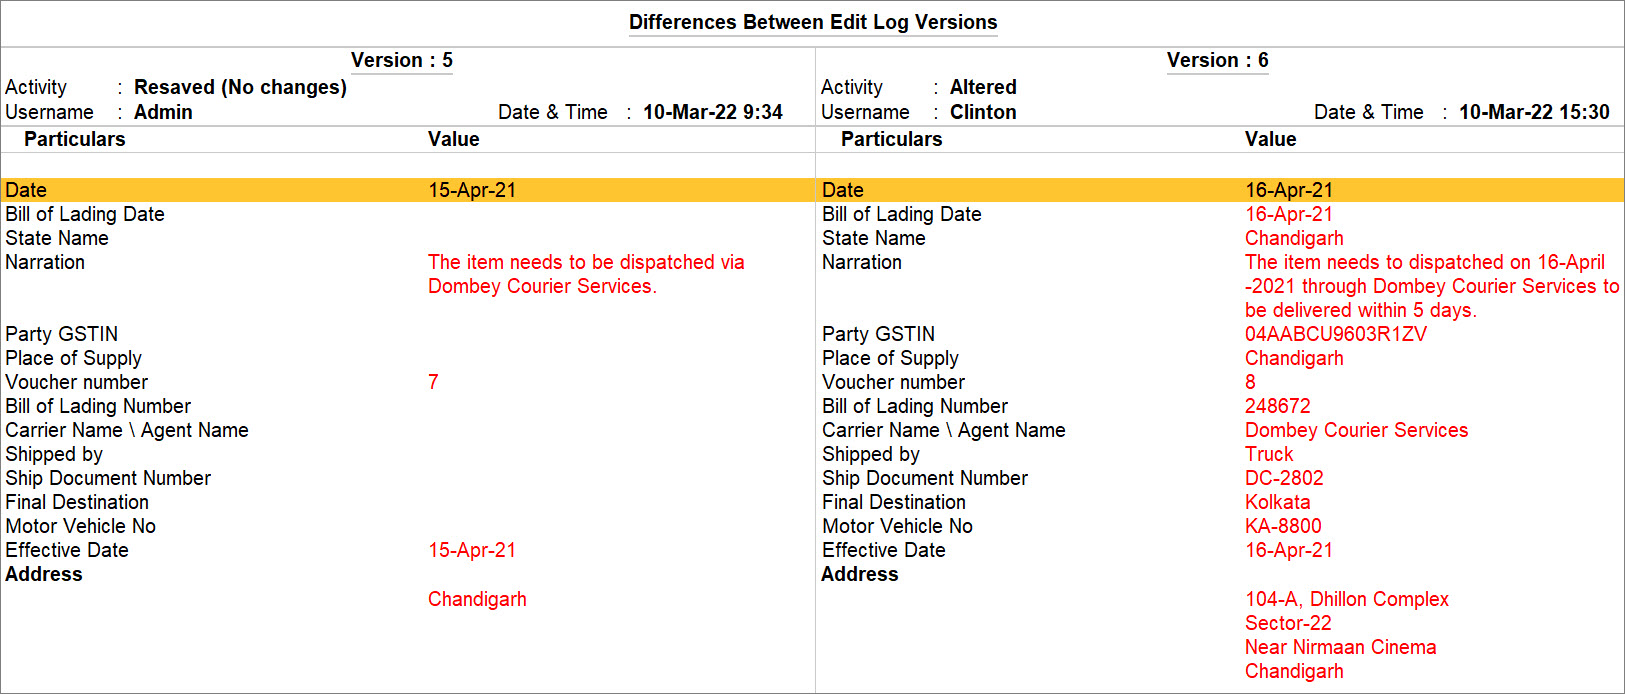 Differences Between Edit Log Versions After Configuring